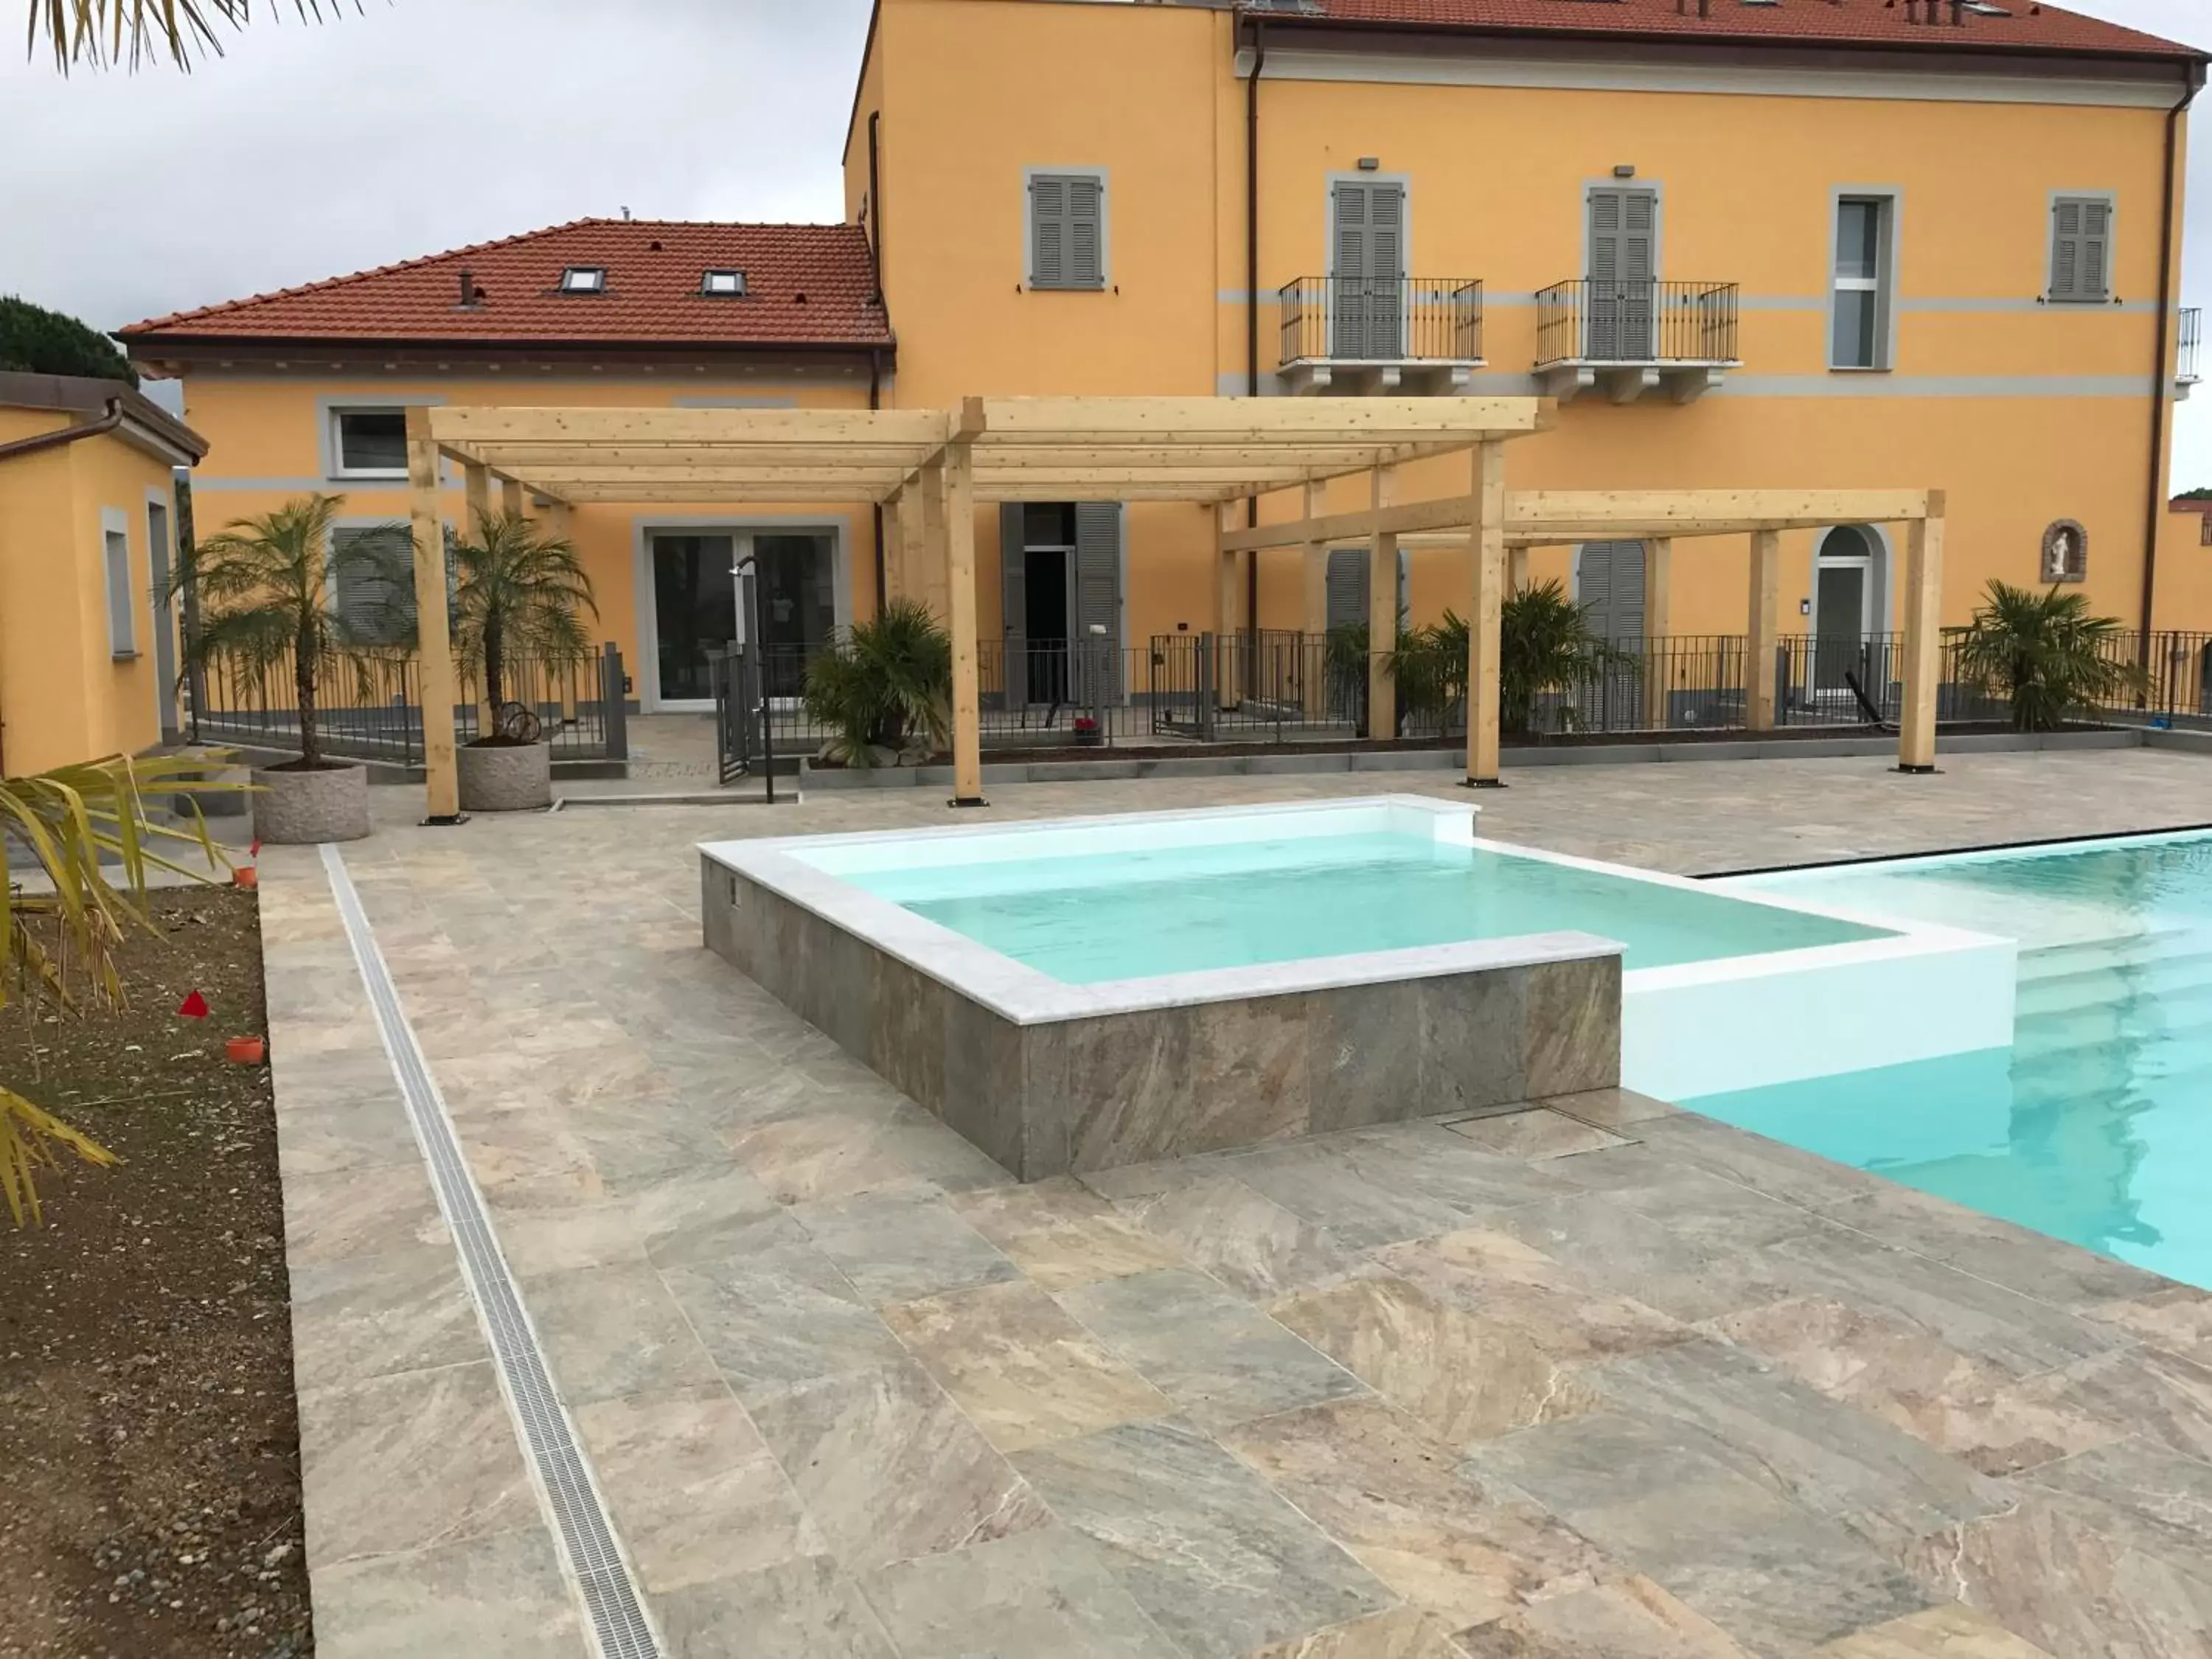 Property building, Swimming Pool in Villa Canepa